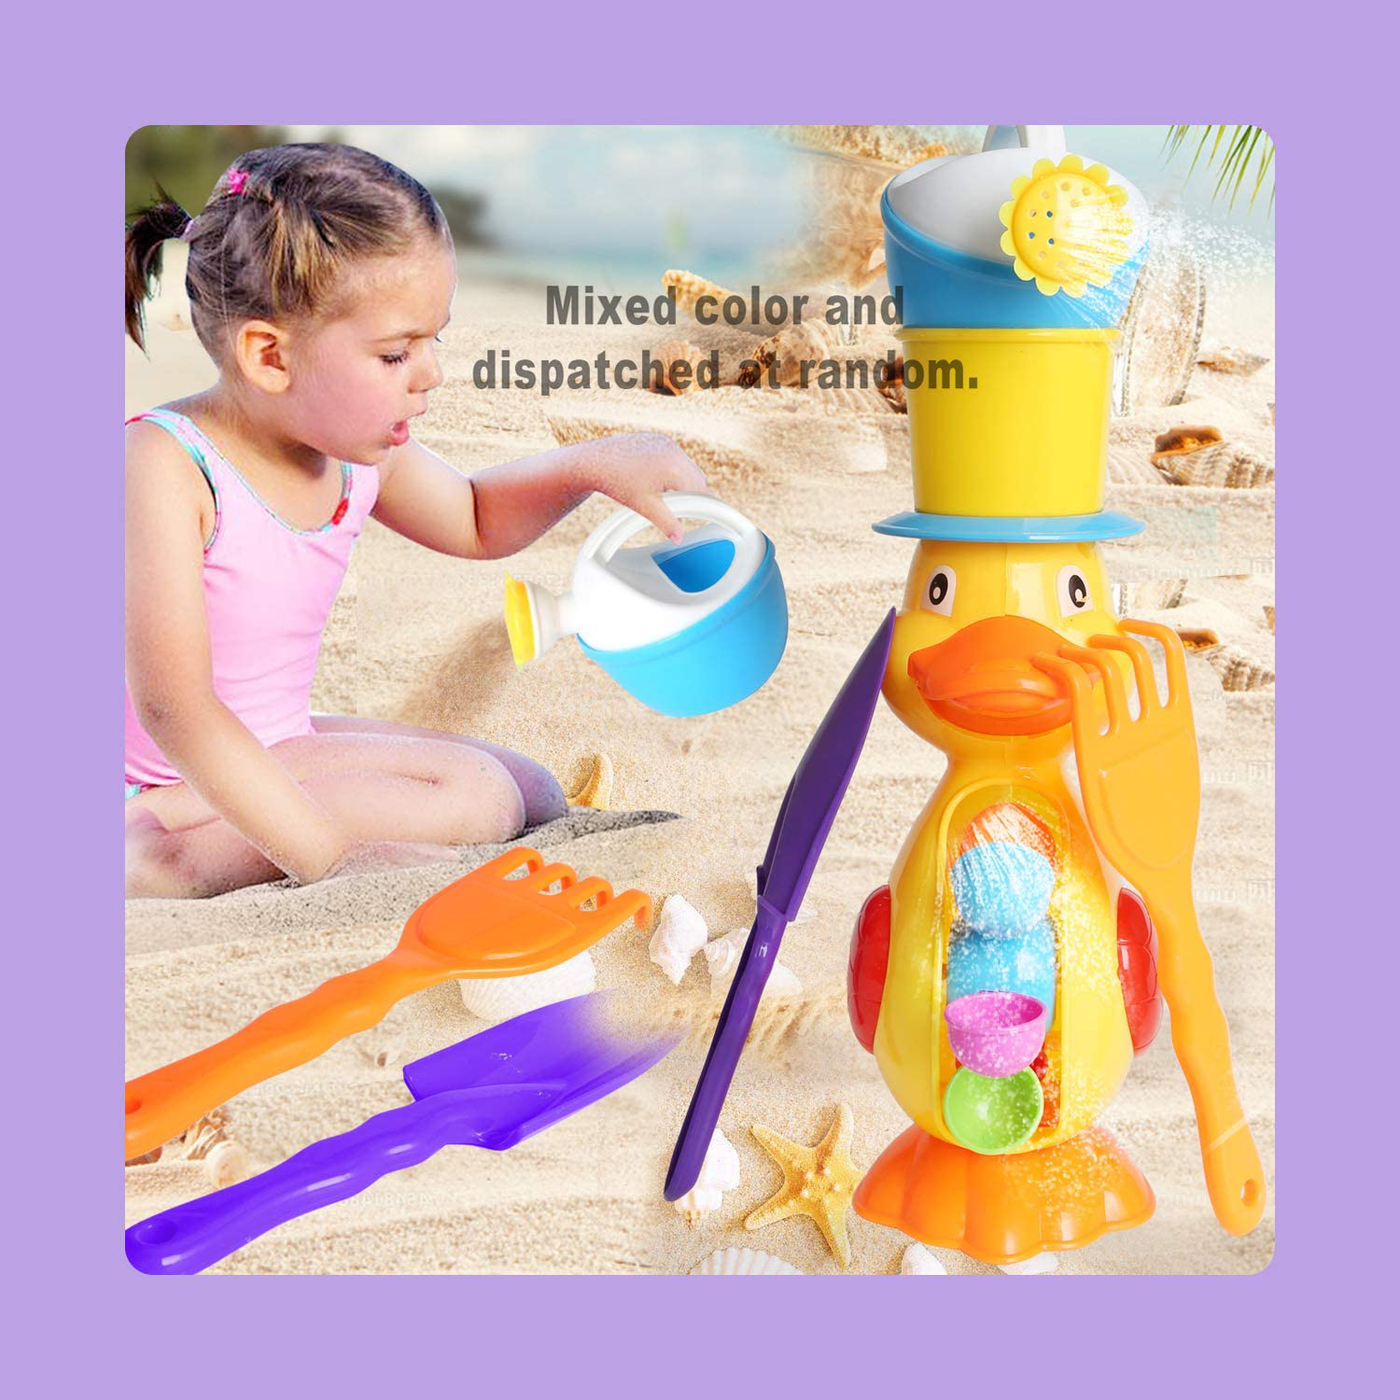 OUFOTAT Beach Toy Set for Kids - Including Shovel, Rake, Watering Can and Duck Waterwheel Random Color, Indoor Outdoor Sand Play Toys for Boys and Girls (4PCS Beach Toys 6231)